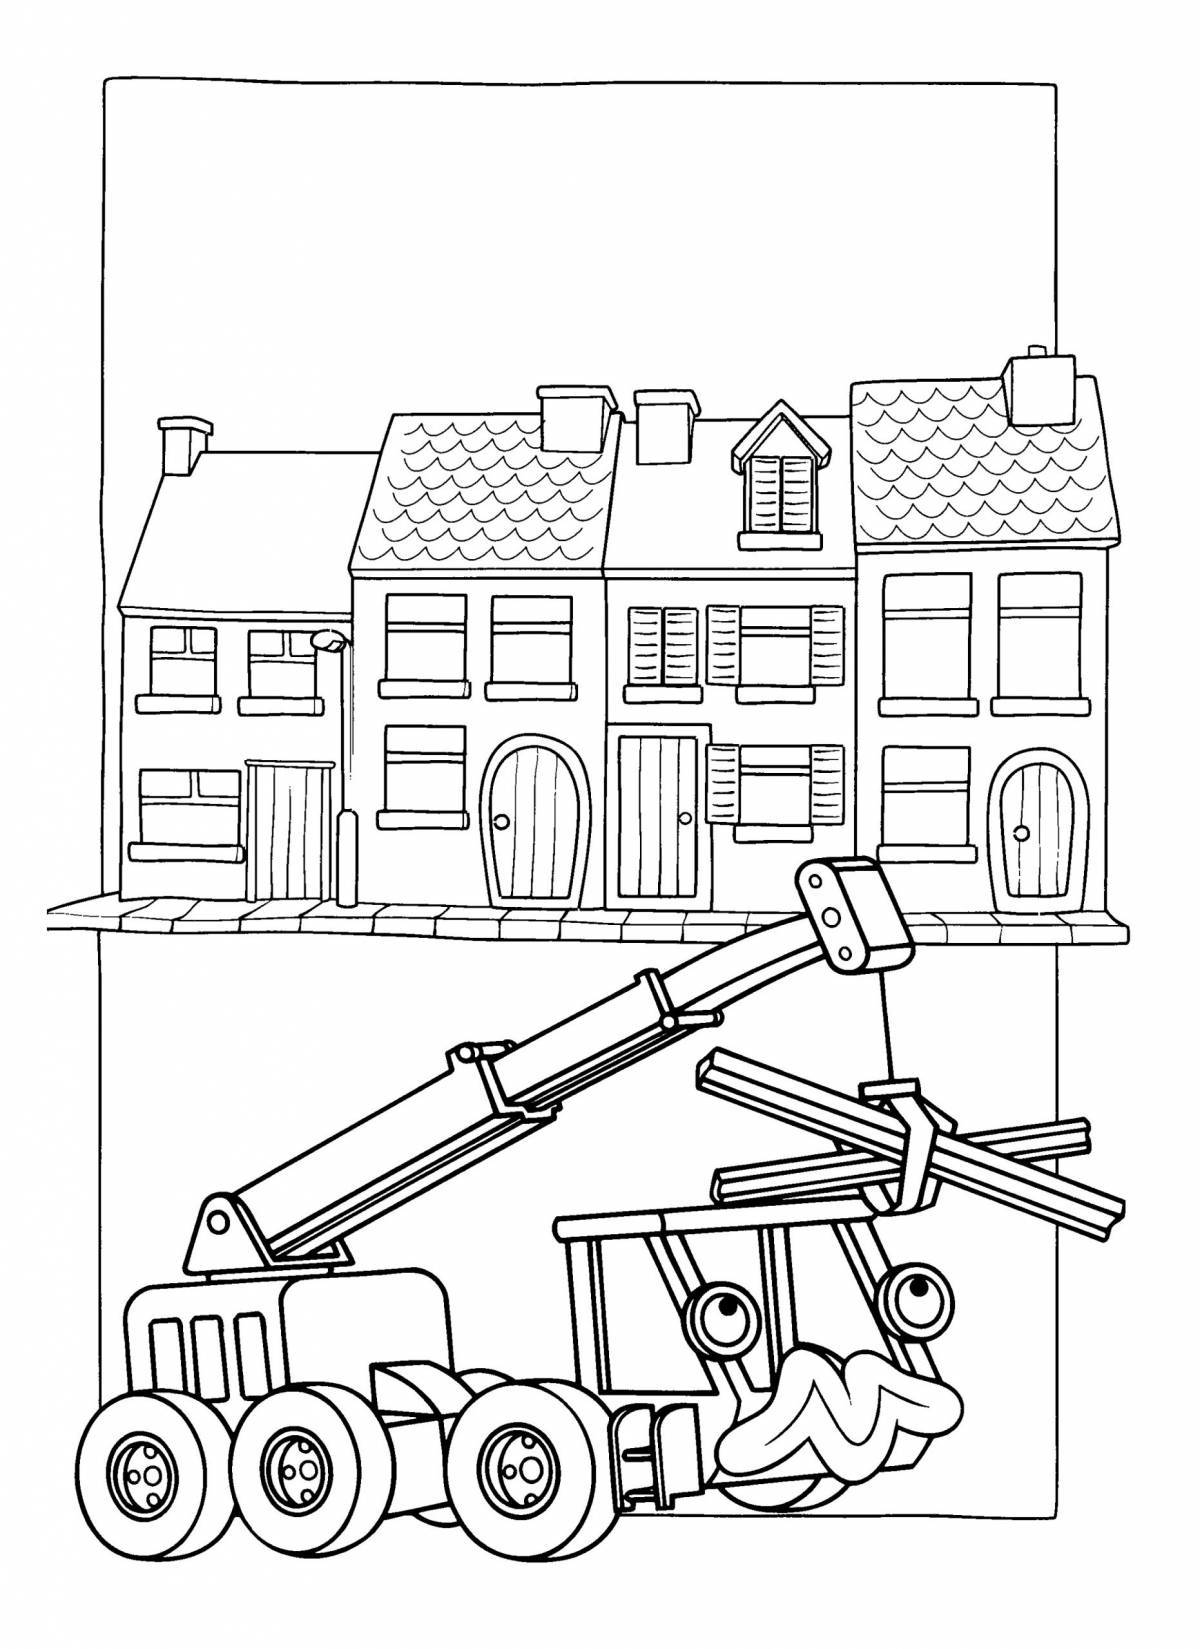 Creative construction coloring page